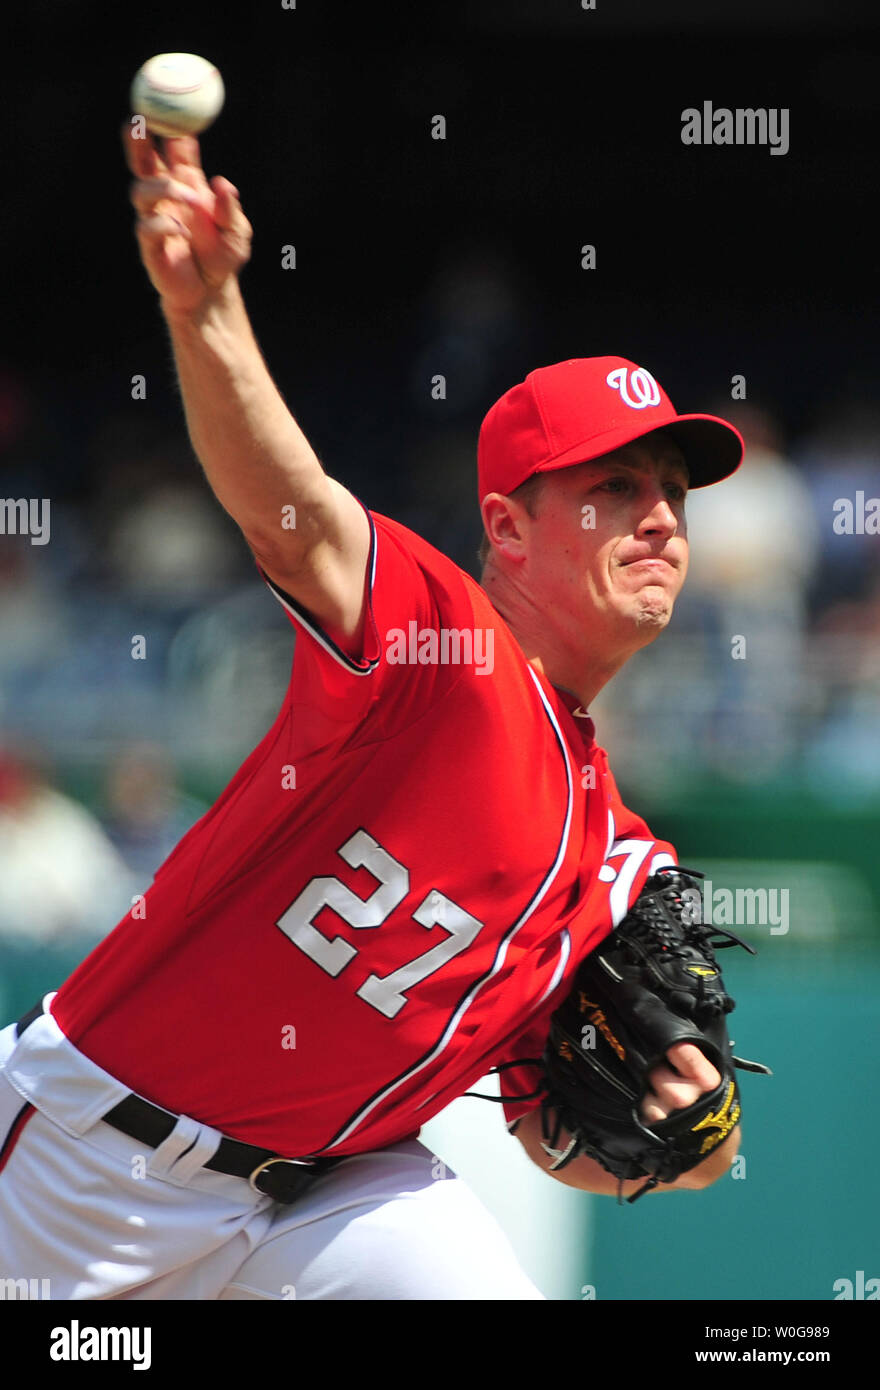 Washington Nationals' pitcher Jordan Zimmermann pitches against the Atlanta Braves during the first inning at Nationals Park in Washington, April 3, 2011.  UPI/Kevin Dietsch Stock Photo